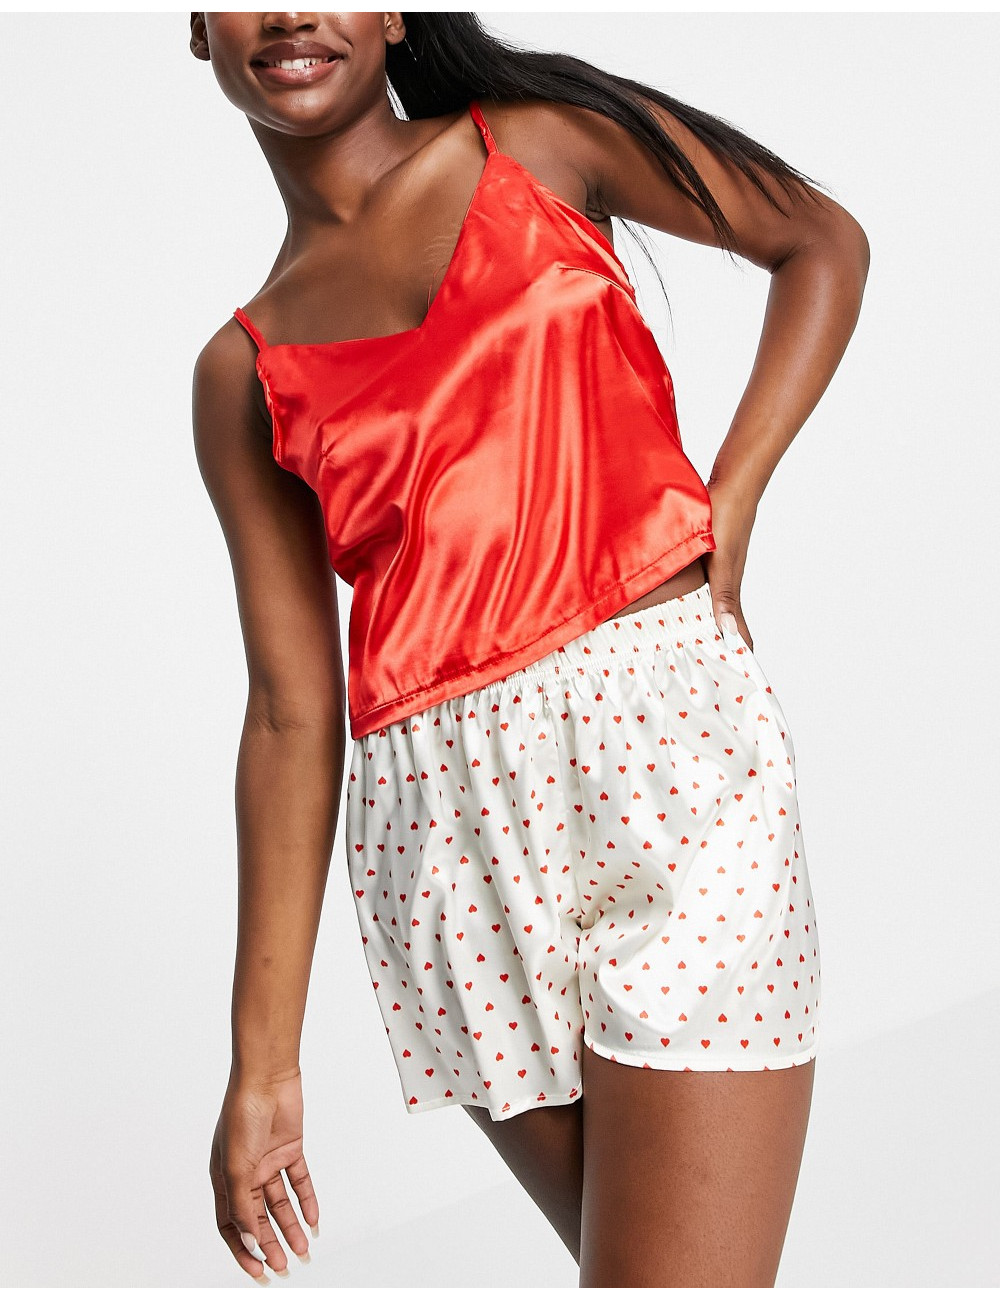 Night heart print red cami...